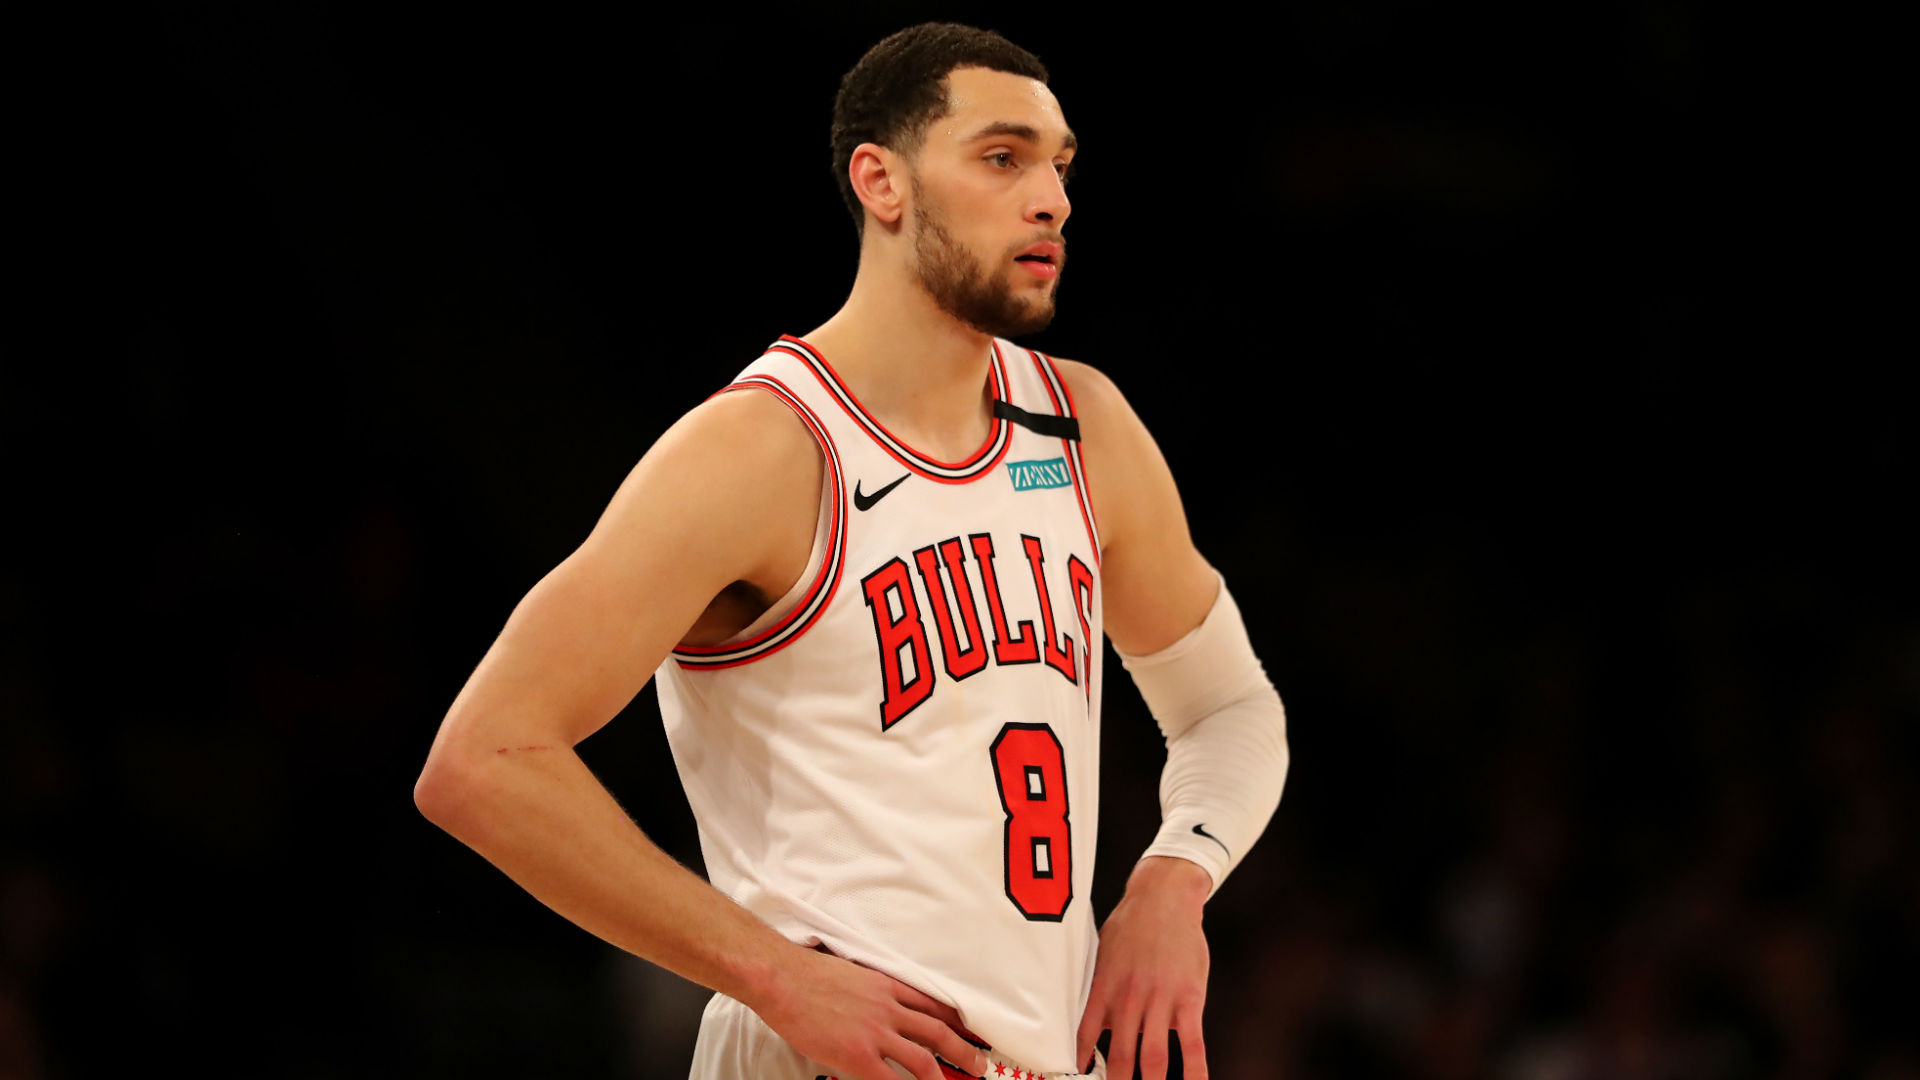 The Chicago Bulls will not be part of the 22-team NBA tournament to resume the 2019-20 campaign, much to Zach LaVine's annoyance.